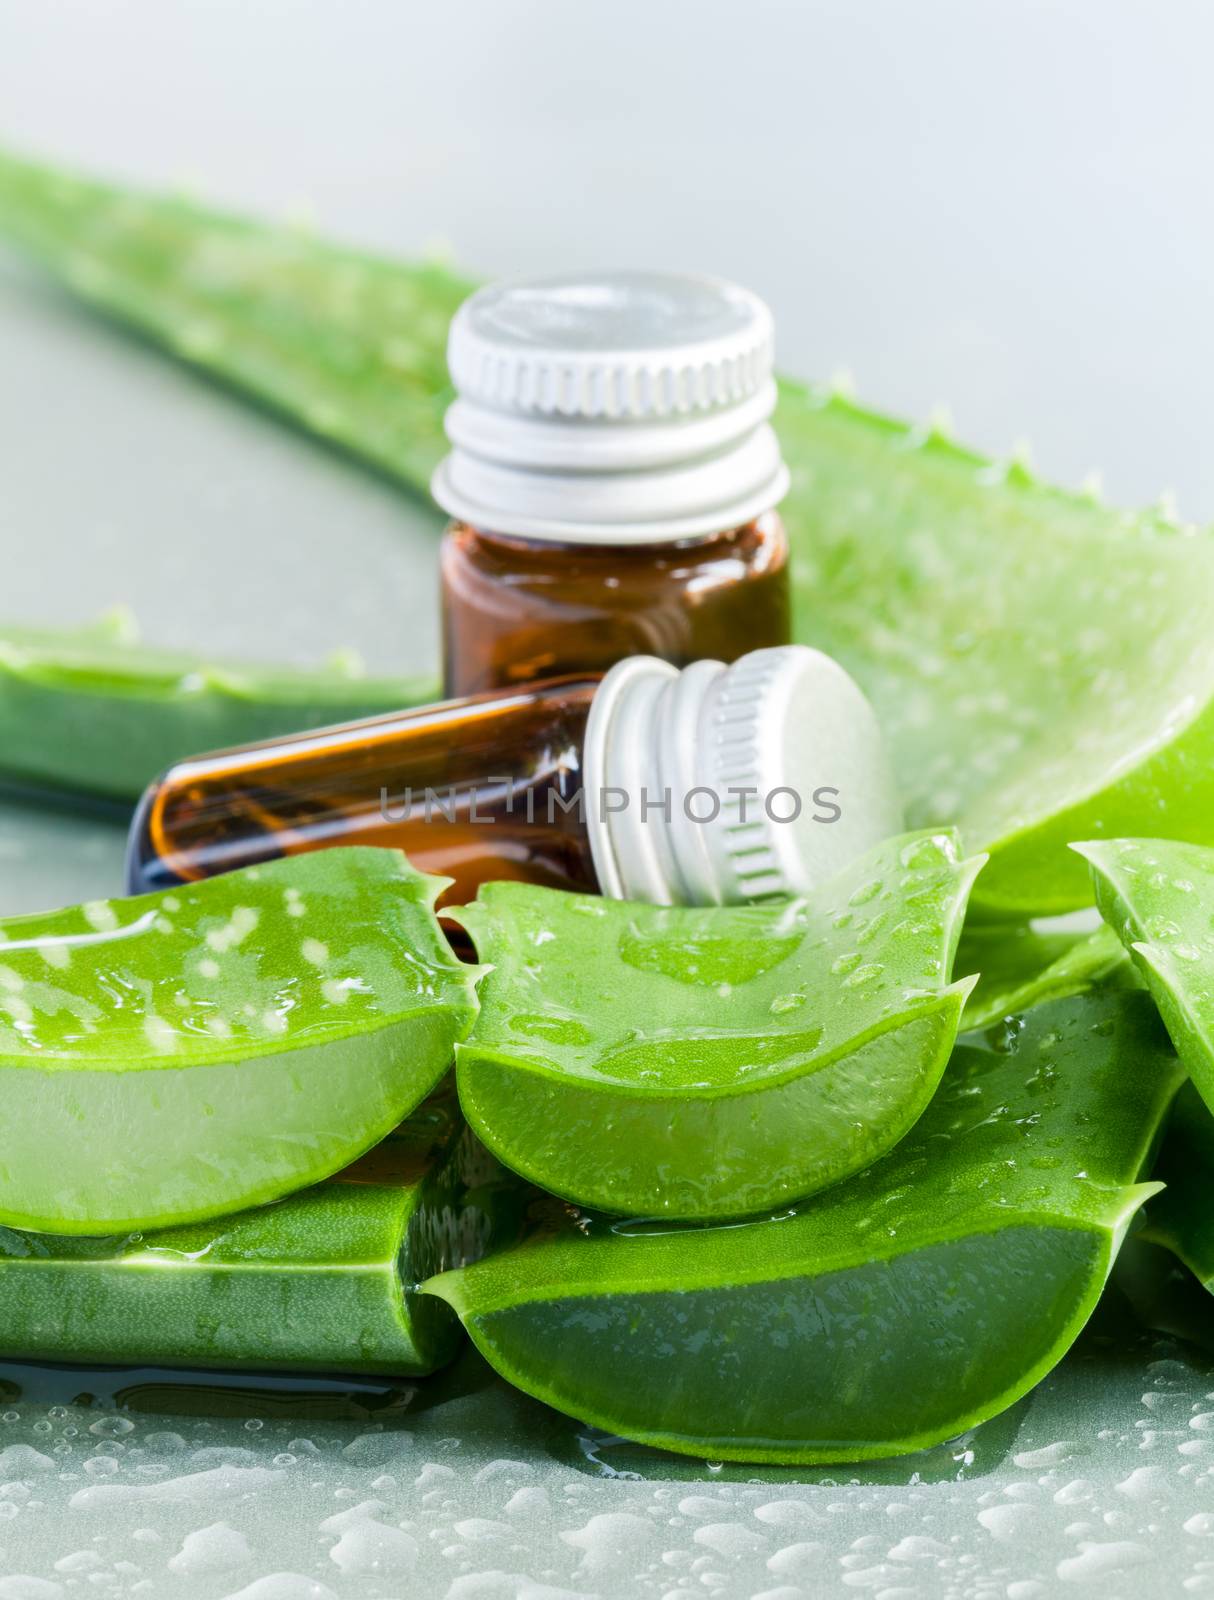  Aloevera - Natural Spas Ingredients  for skin care. by kerdkanno